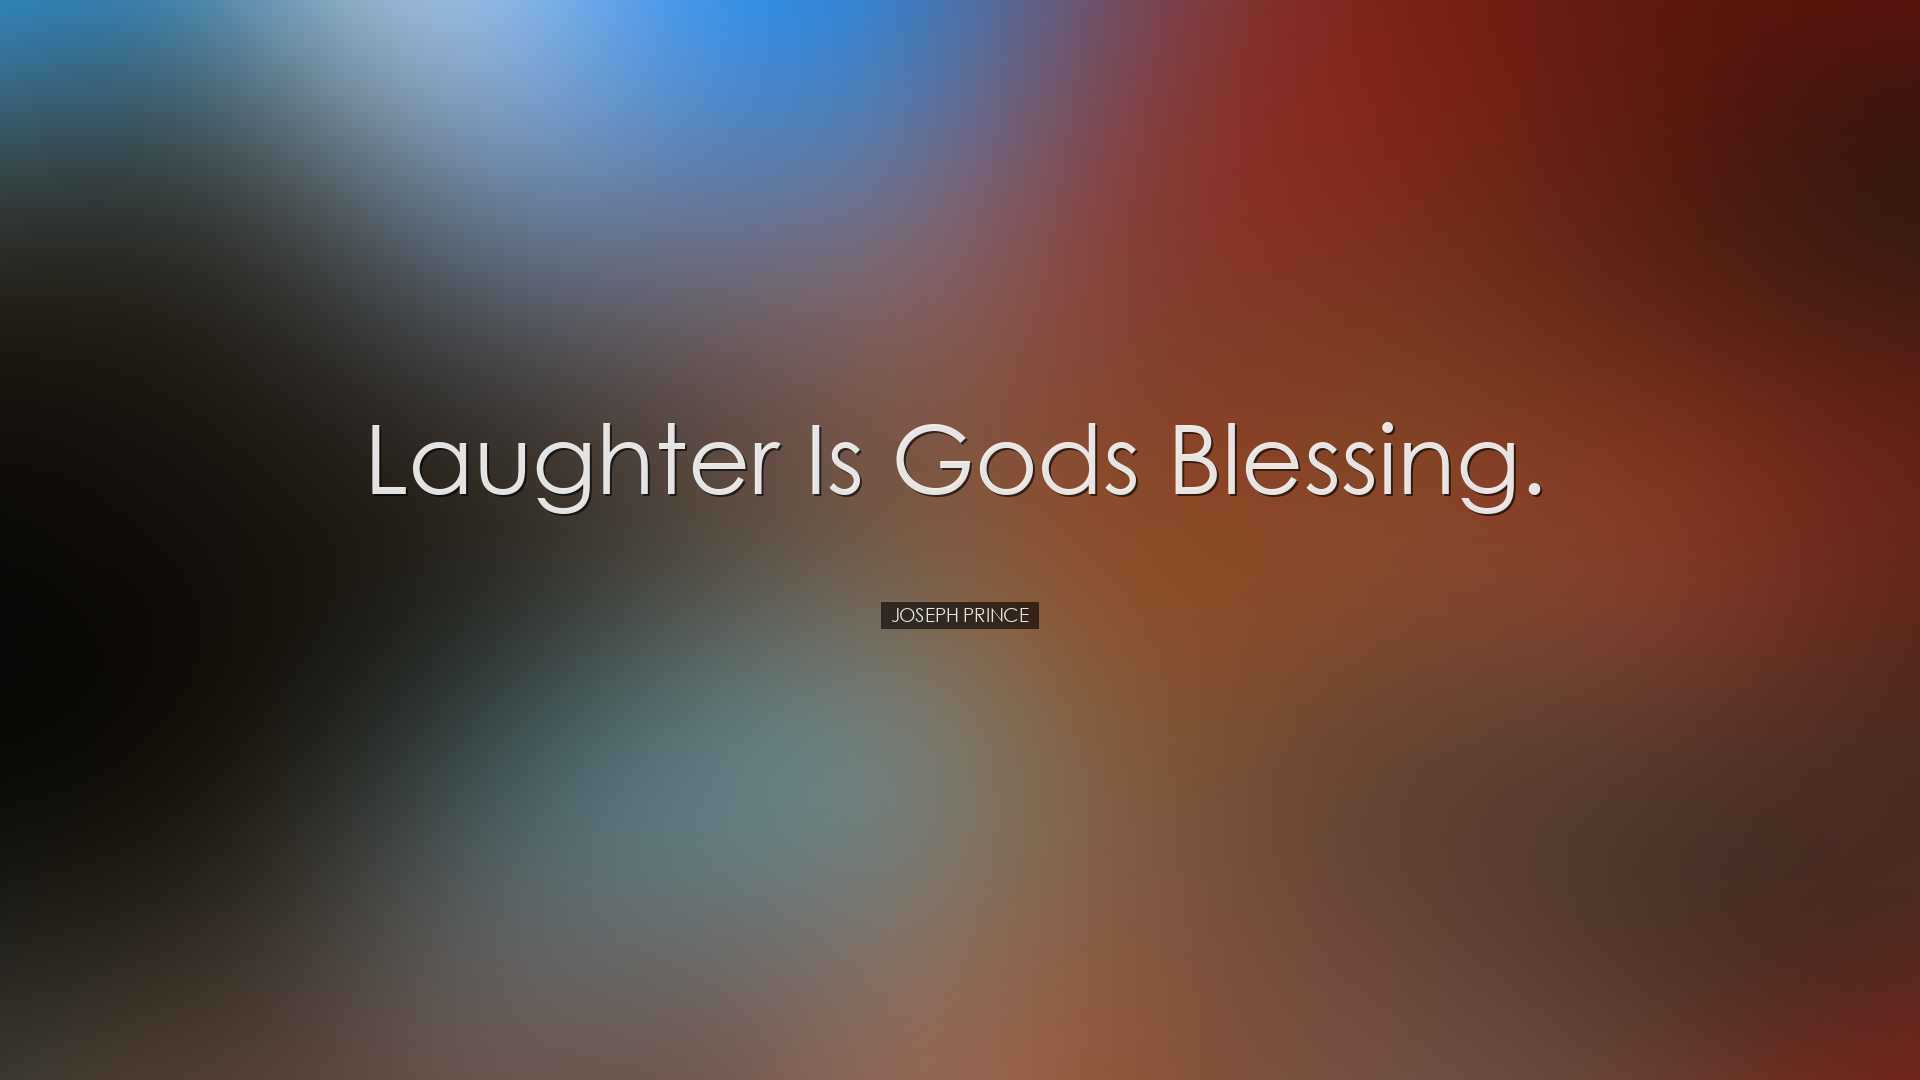 Laughter is Gods blessing. - Joseph Prince